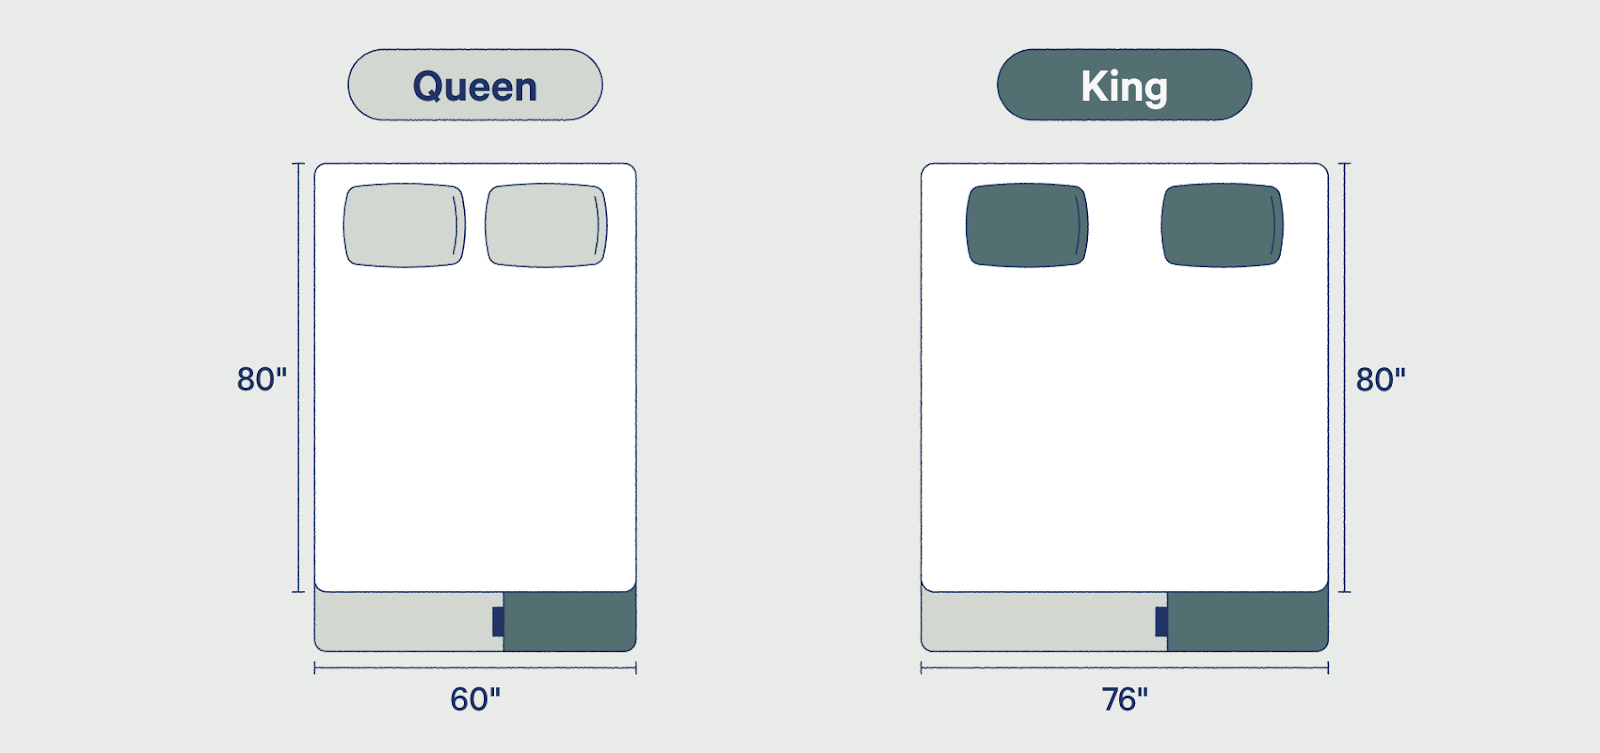 King Vs Queen Bed Size And Comparison, What Is The Width Of A King Bed